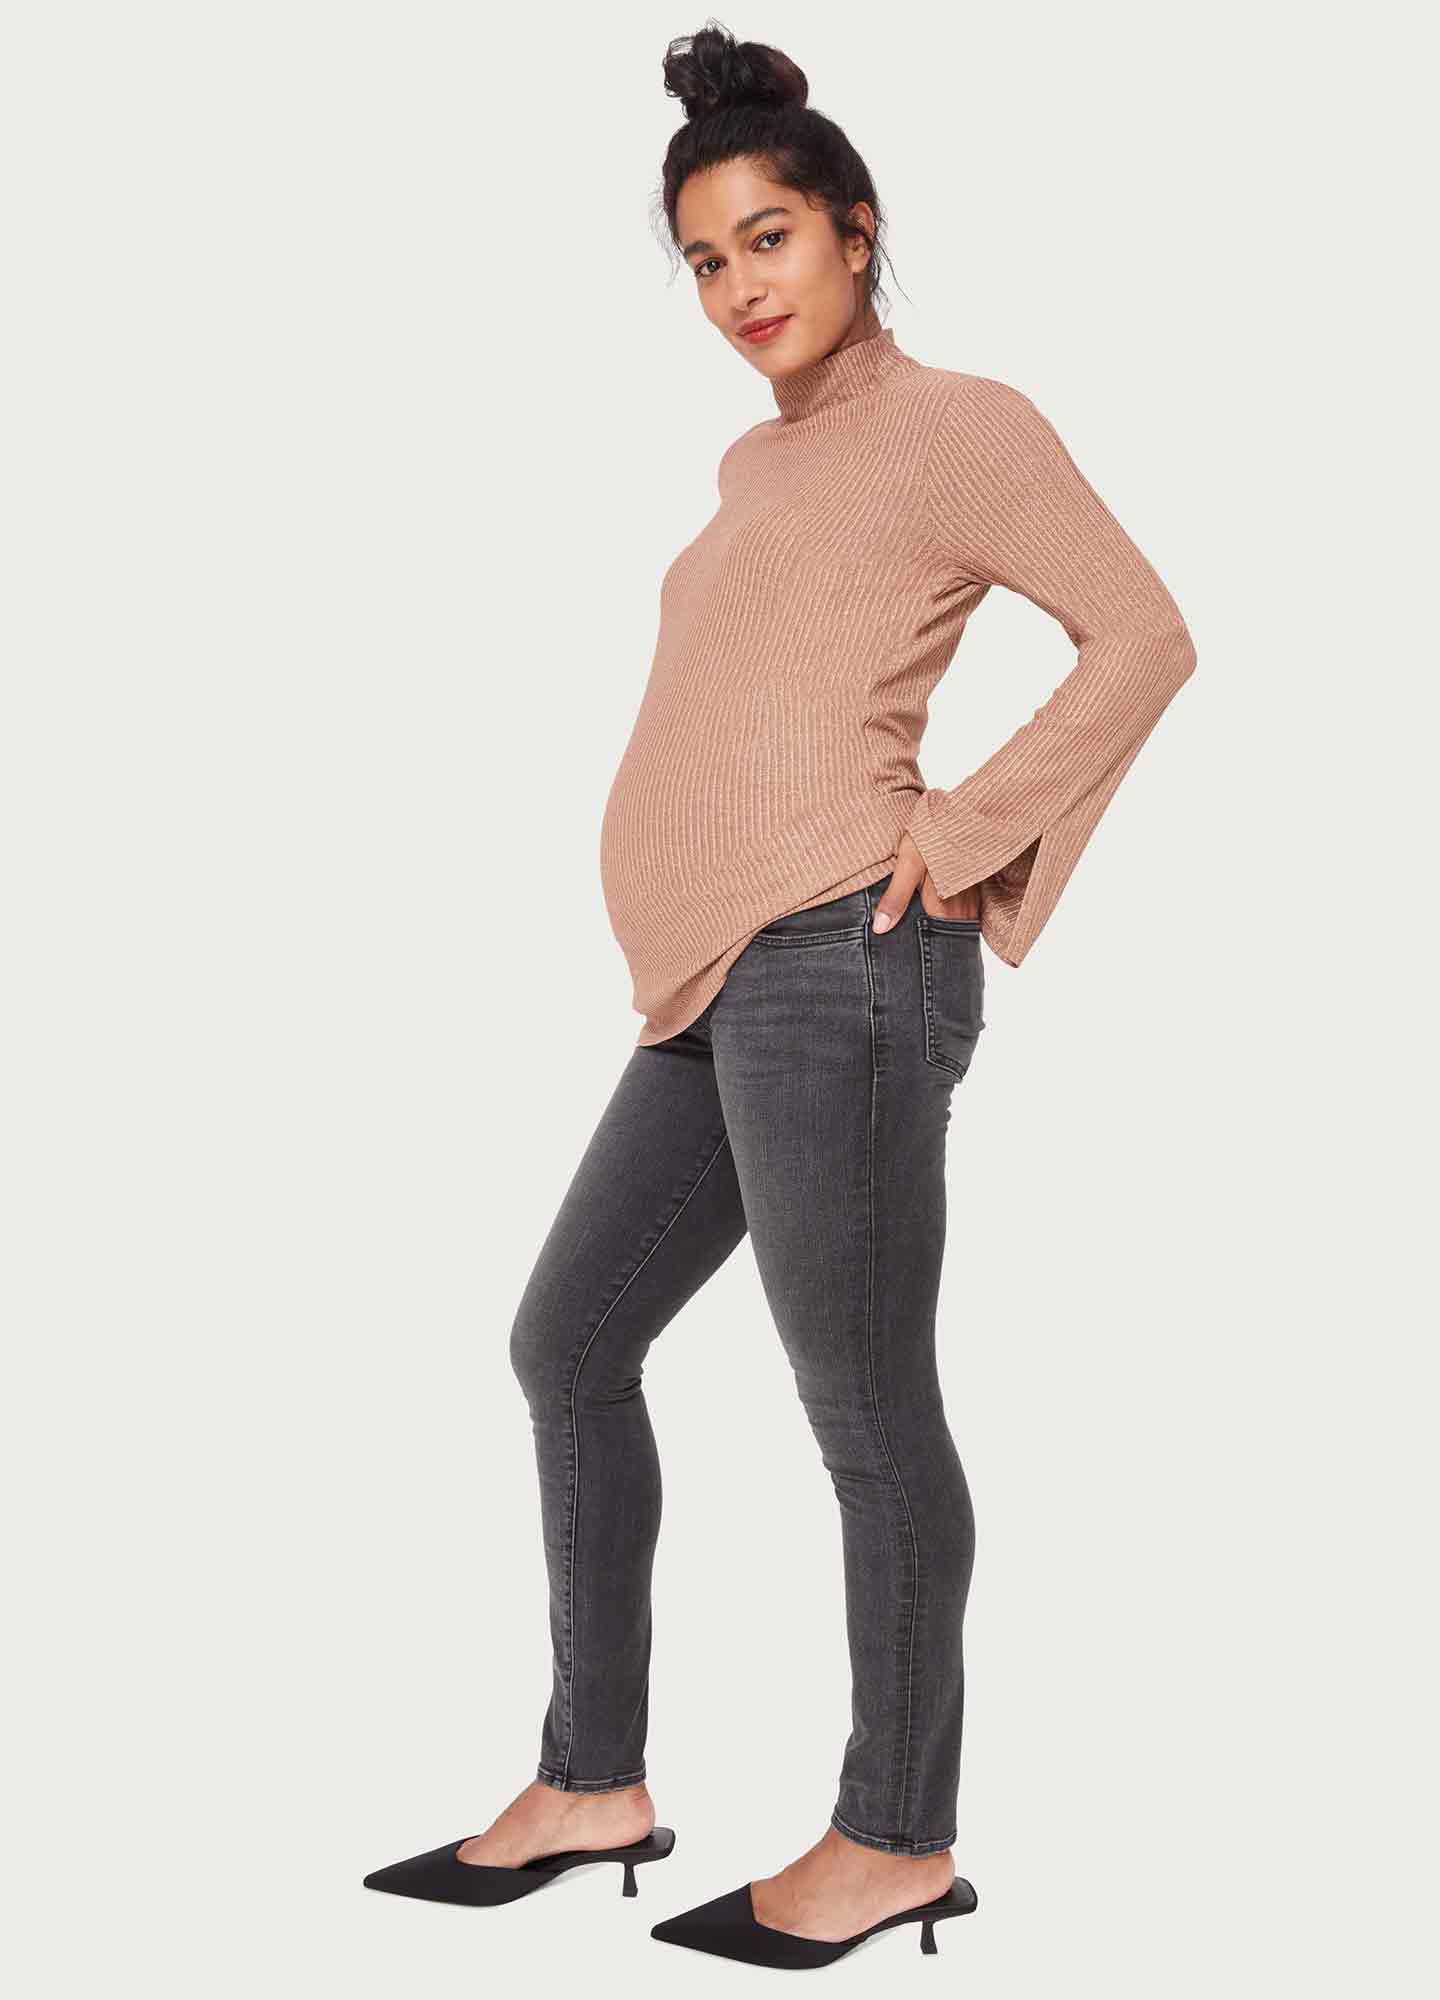 Best Places to Shop for Maternity Clothes